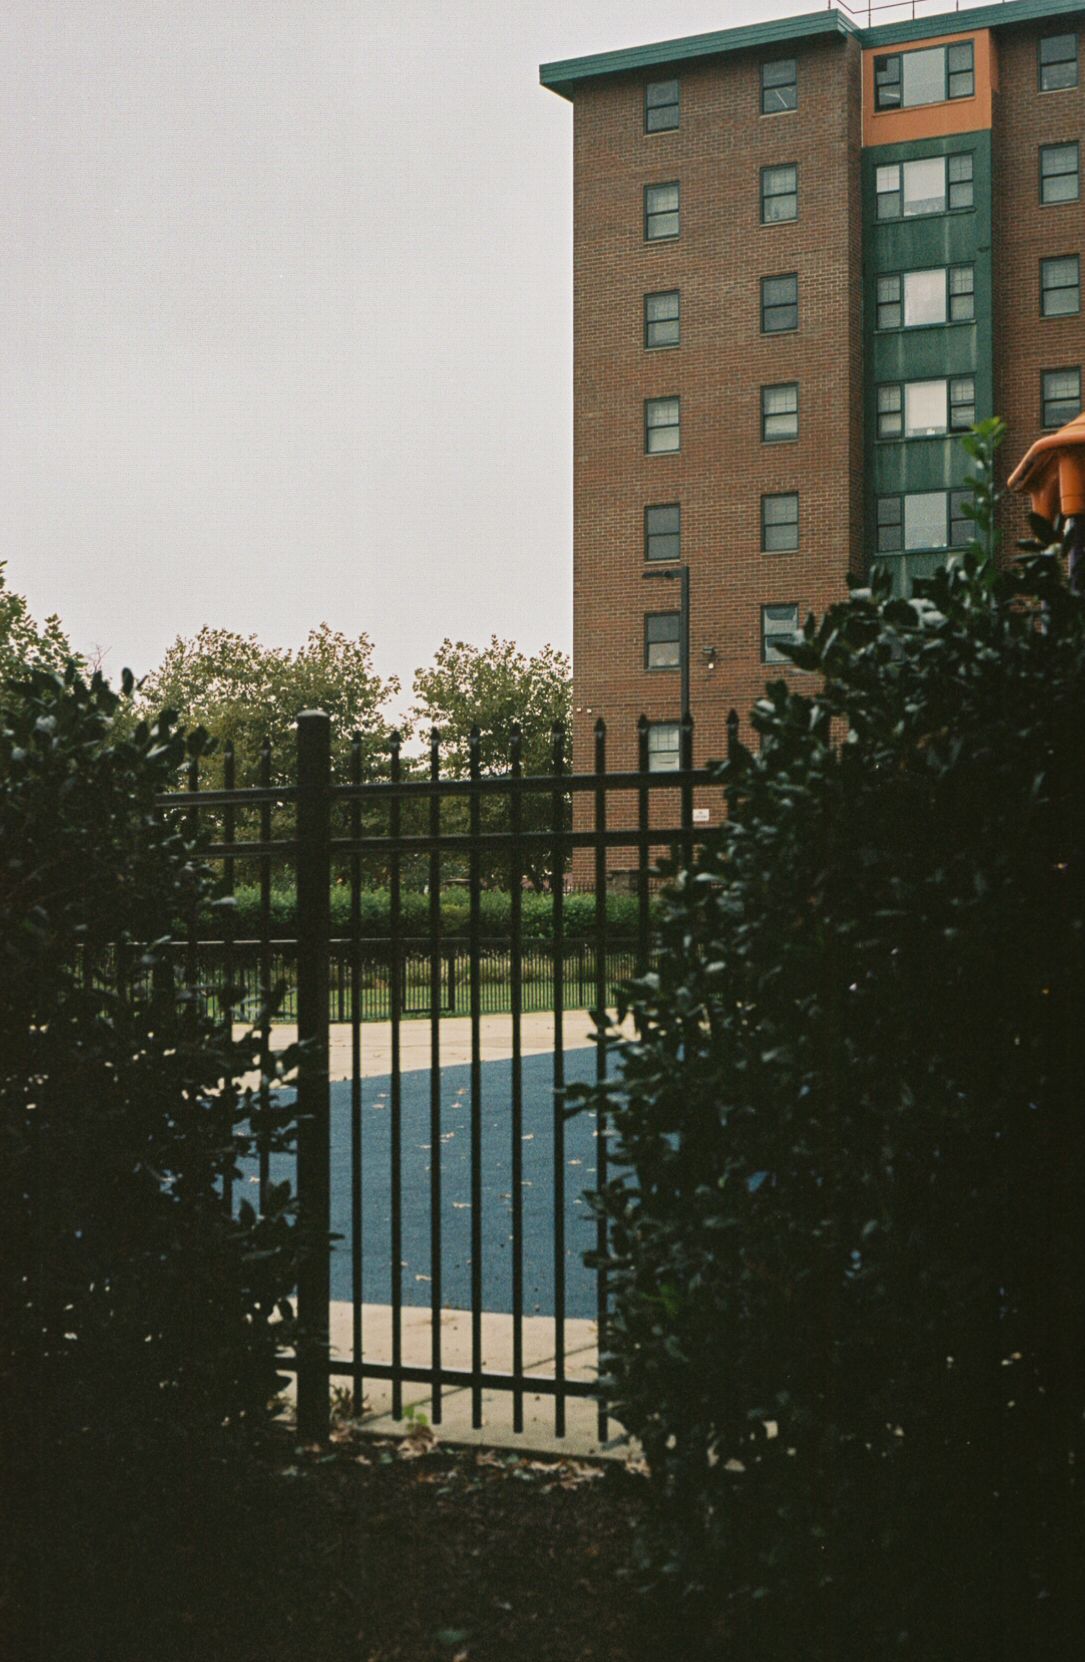 A 35mm film street photograph of a brick apartment building in Washington, DC. The apartment building has green and orange details. A blue courtyard is visible through a steel fence.